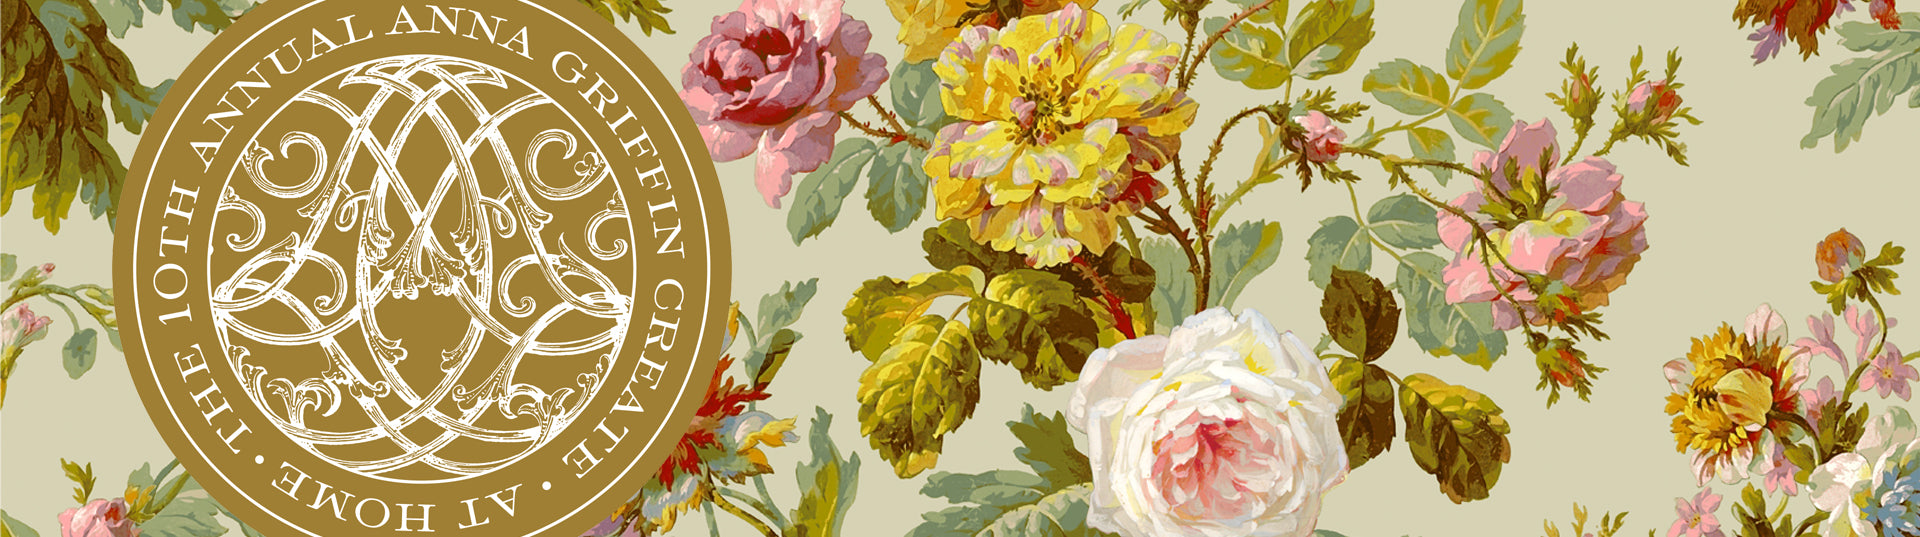 Floral pattern with pink, white, and yellow flowers next to a gold emblem containing decorative text “10th Annual Anna Griffin Create At Home.”.